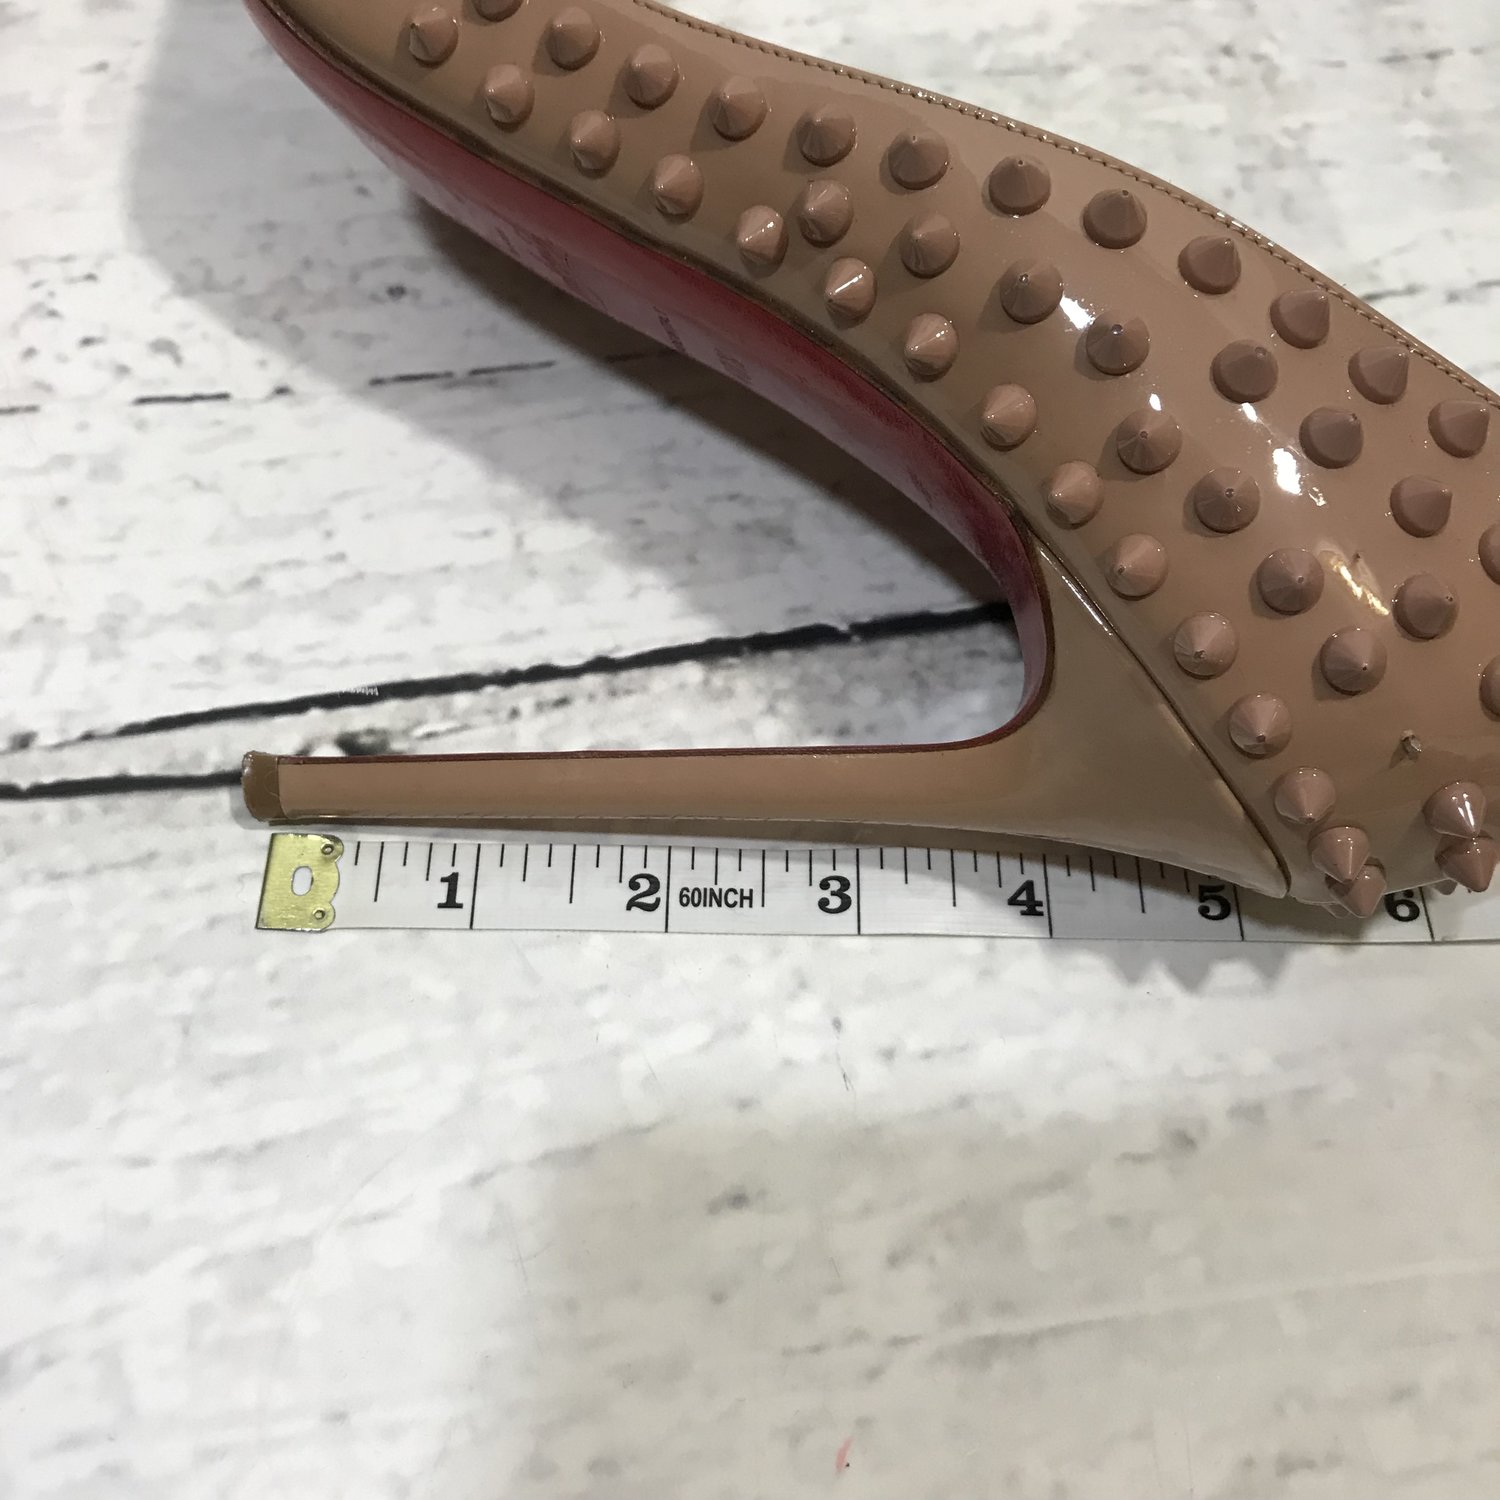 Christian Louboutin Christian Louboutin Pigalle Spikes (€970) found on  Polyvo…  Louboutin high heels, Christian louboutin outlet, Christian  louboutin wedding shoes